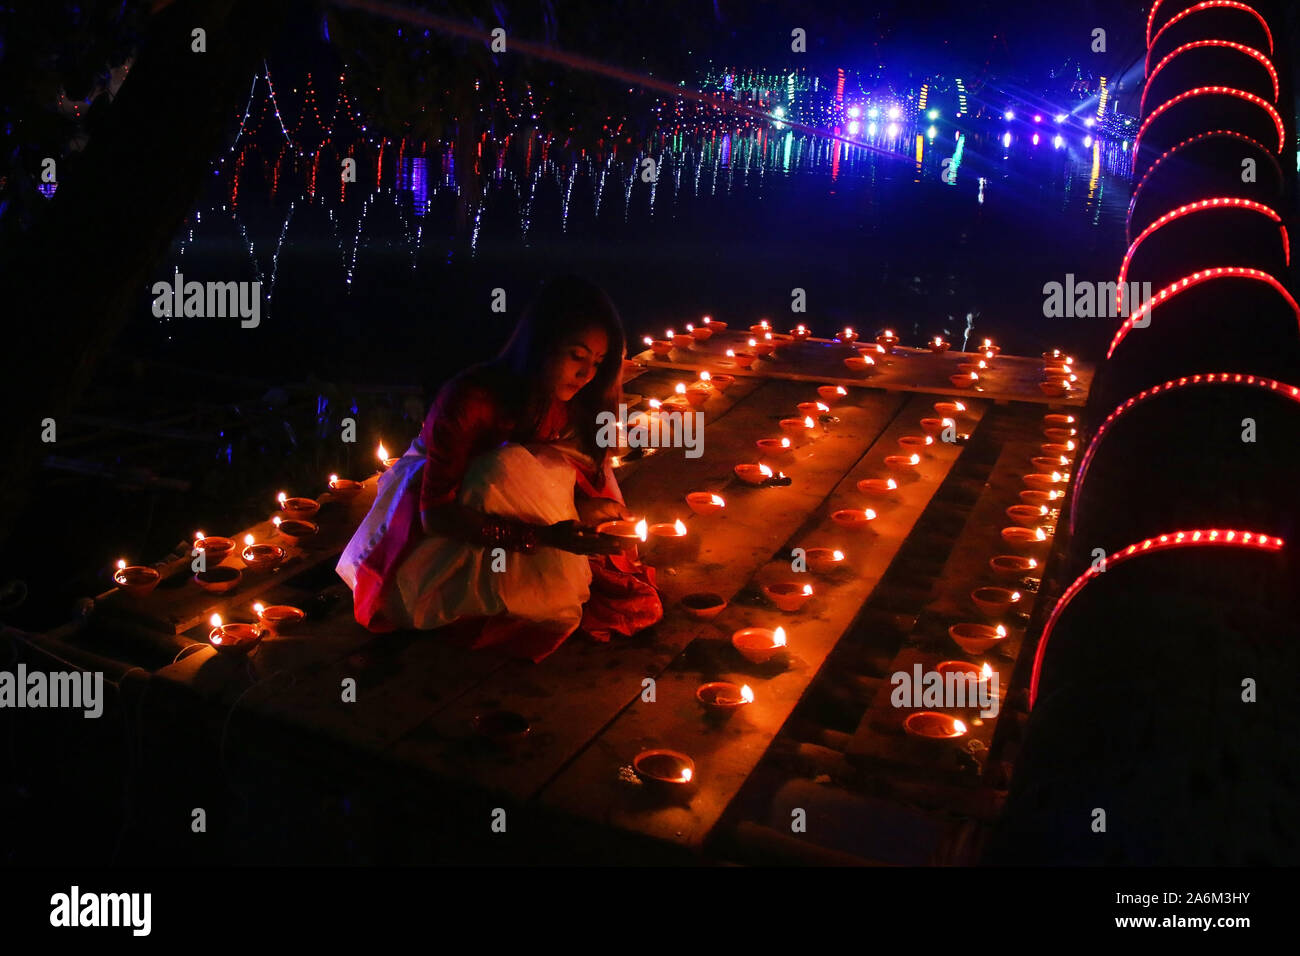 A Bangladeshi Girl Lights Oil Lamps As She Celebrates The Diwali Festival At A Temple In